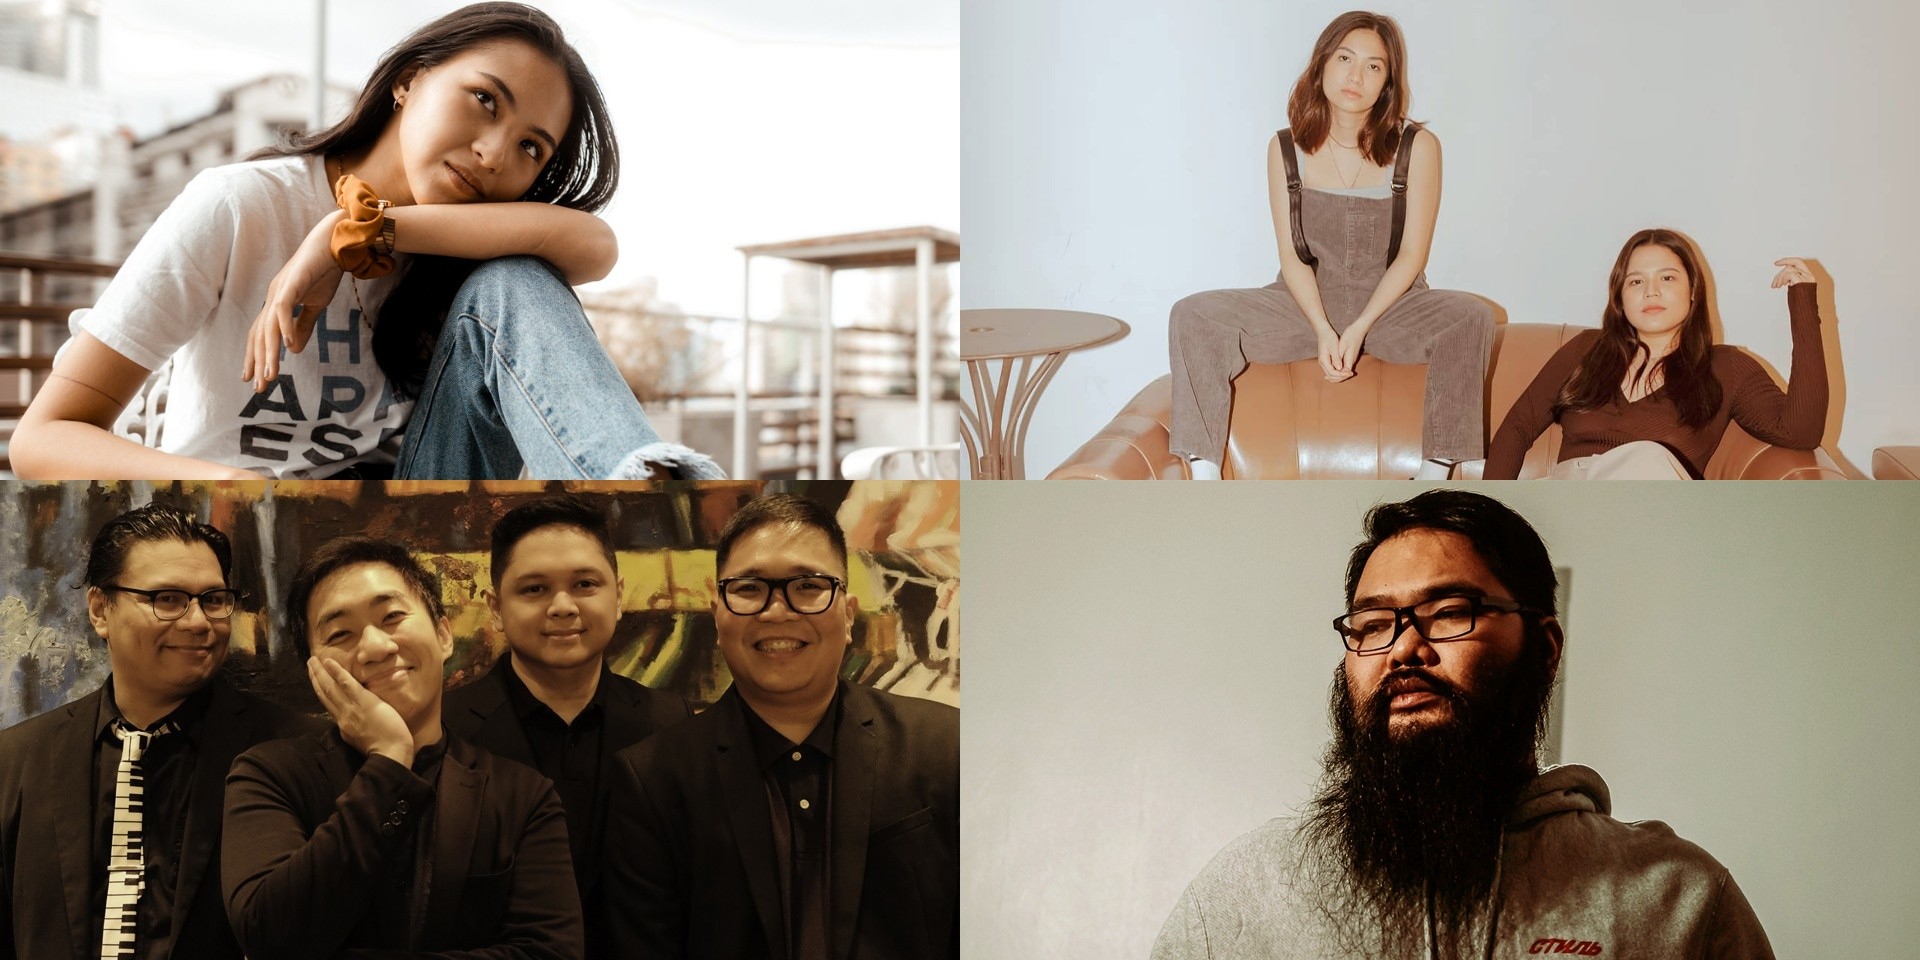 Clara Benin, The Itchyworms, Leanne & Naara, She's Only Sixteen, I Belong to the Zoo, and more release new music – listen